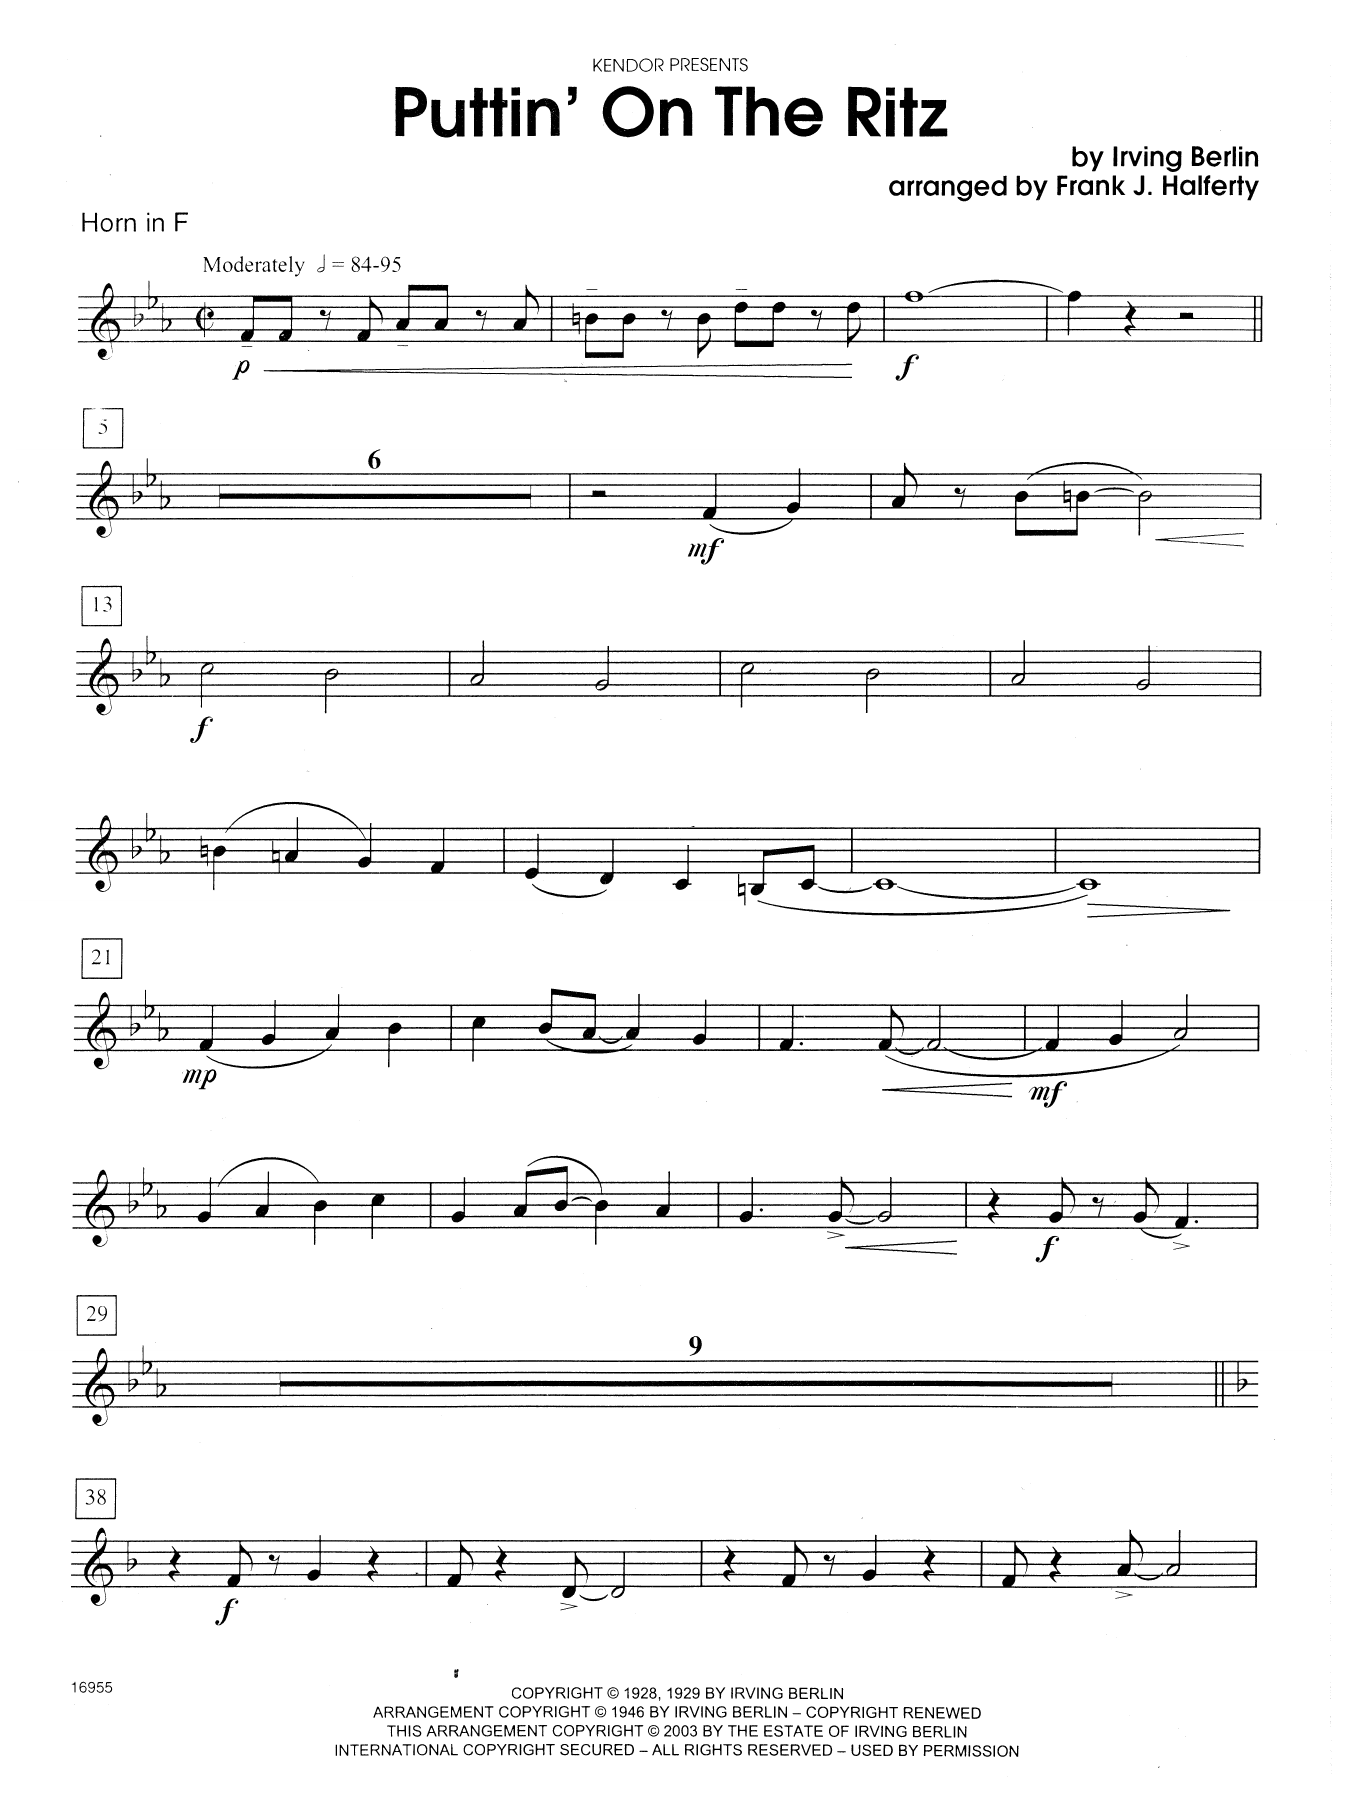 Frank J. Halferty Puttin' on the Ritz - Horn in F sheet music notes and chords. Download Printable PDF.